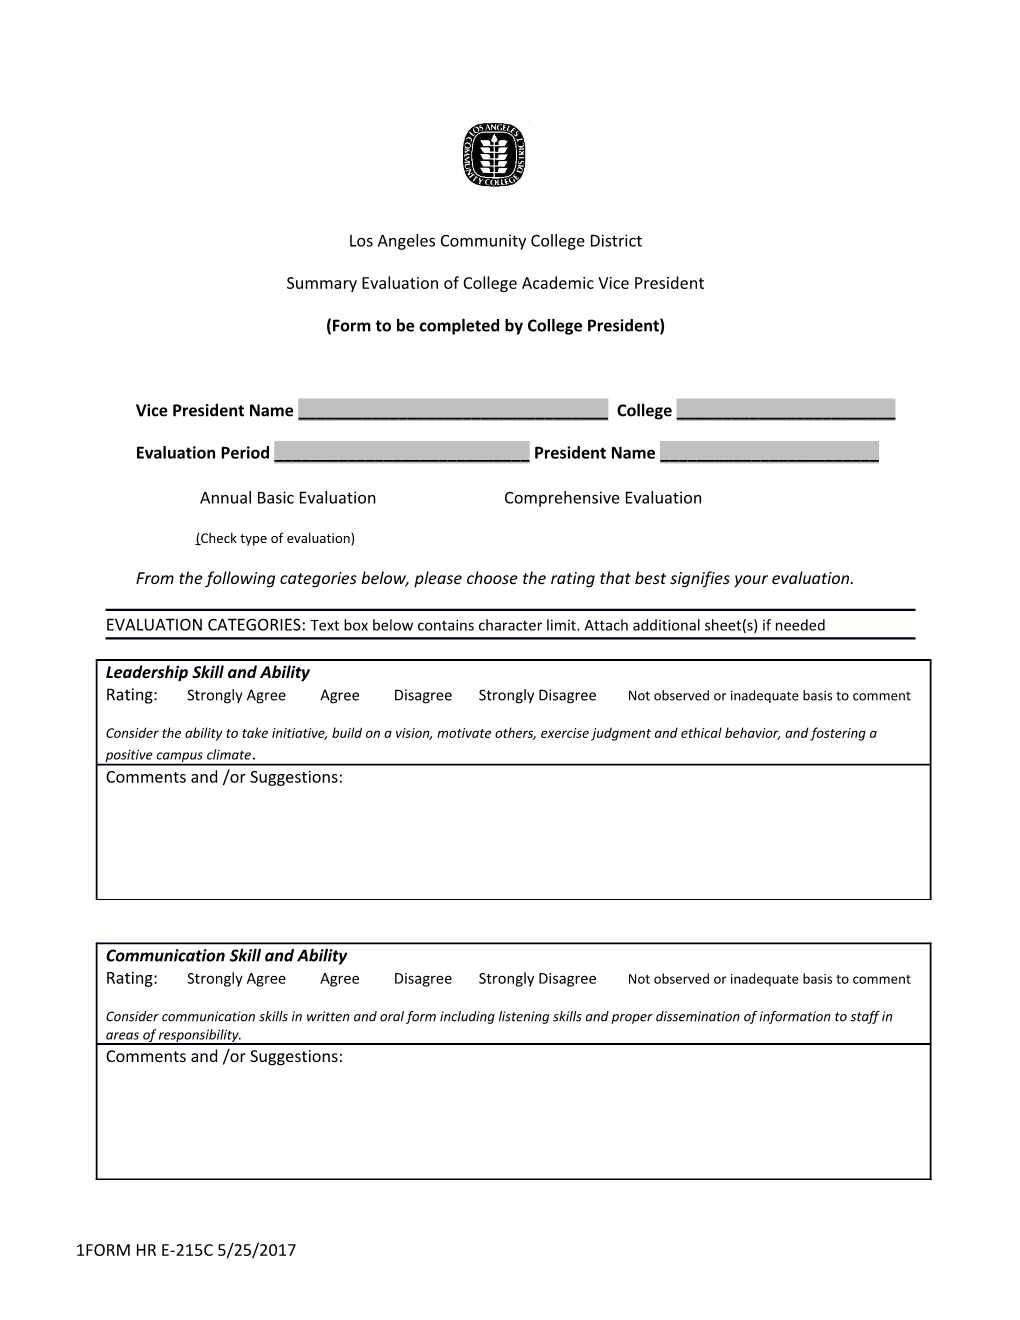 Form to Be Completed by College President